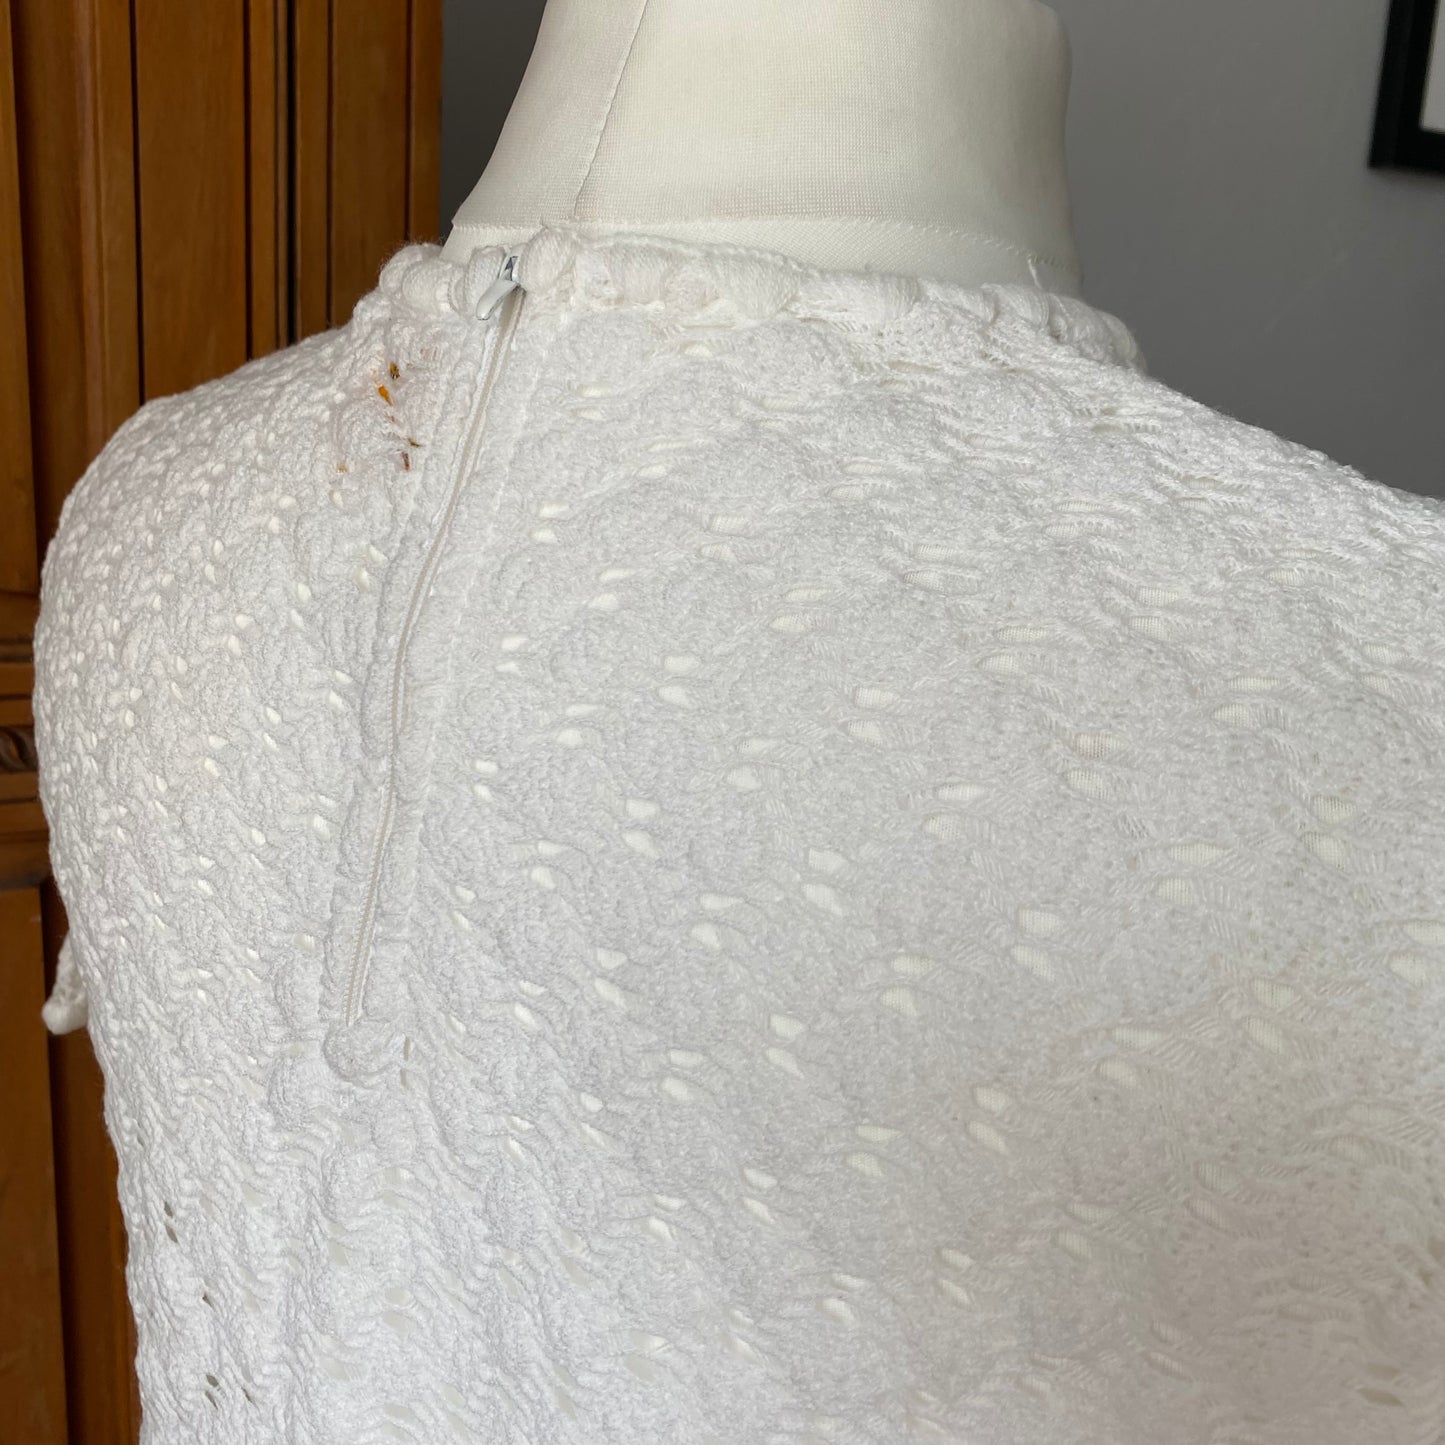 White open knit 60s short sleeved top/ round neck tee shirt  . Approx UK size 12-16